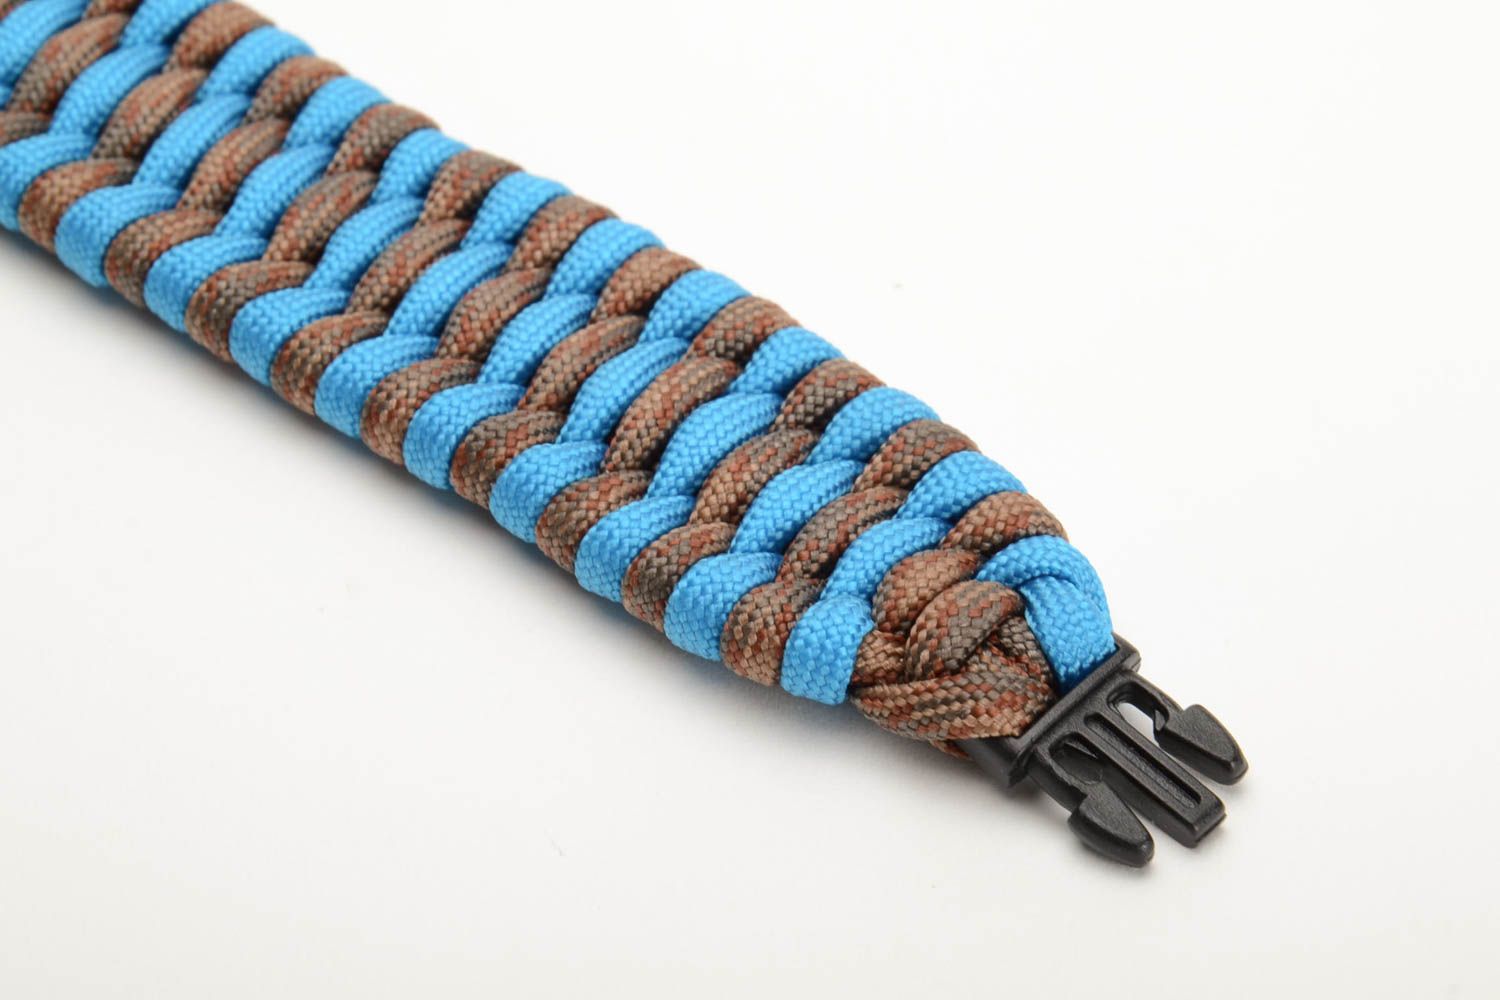 Unusual blue and gray handmade paracord wrist bracelet with fastener photo 2